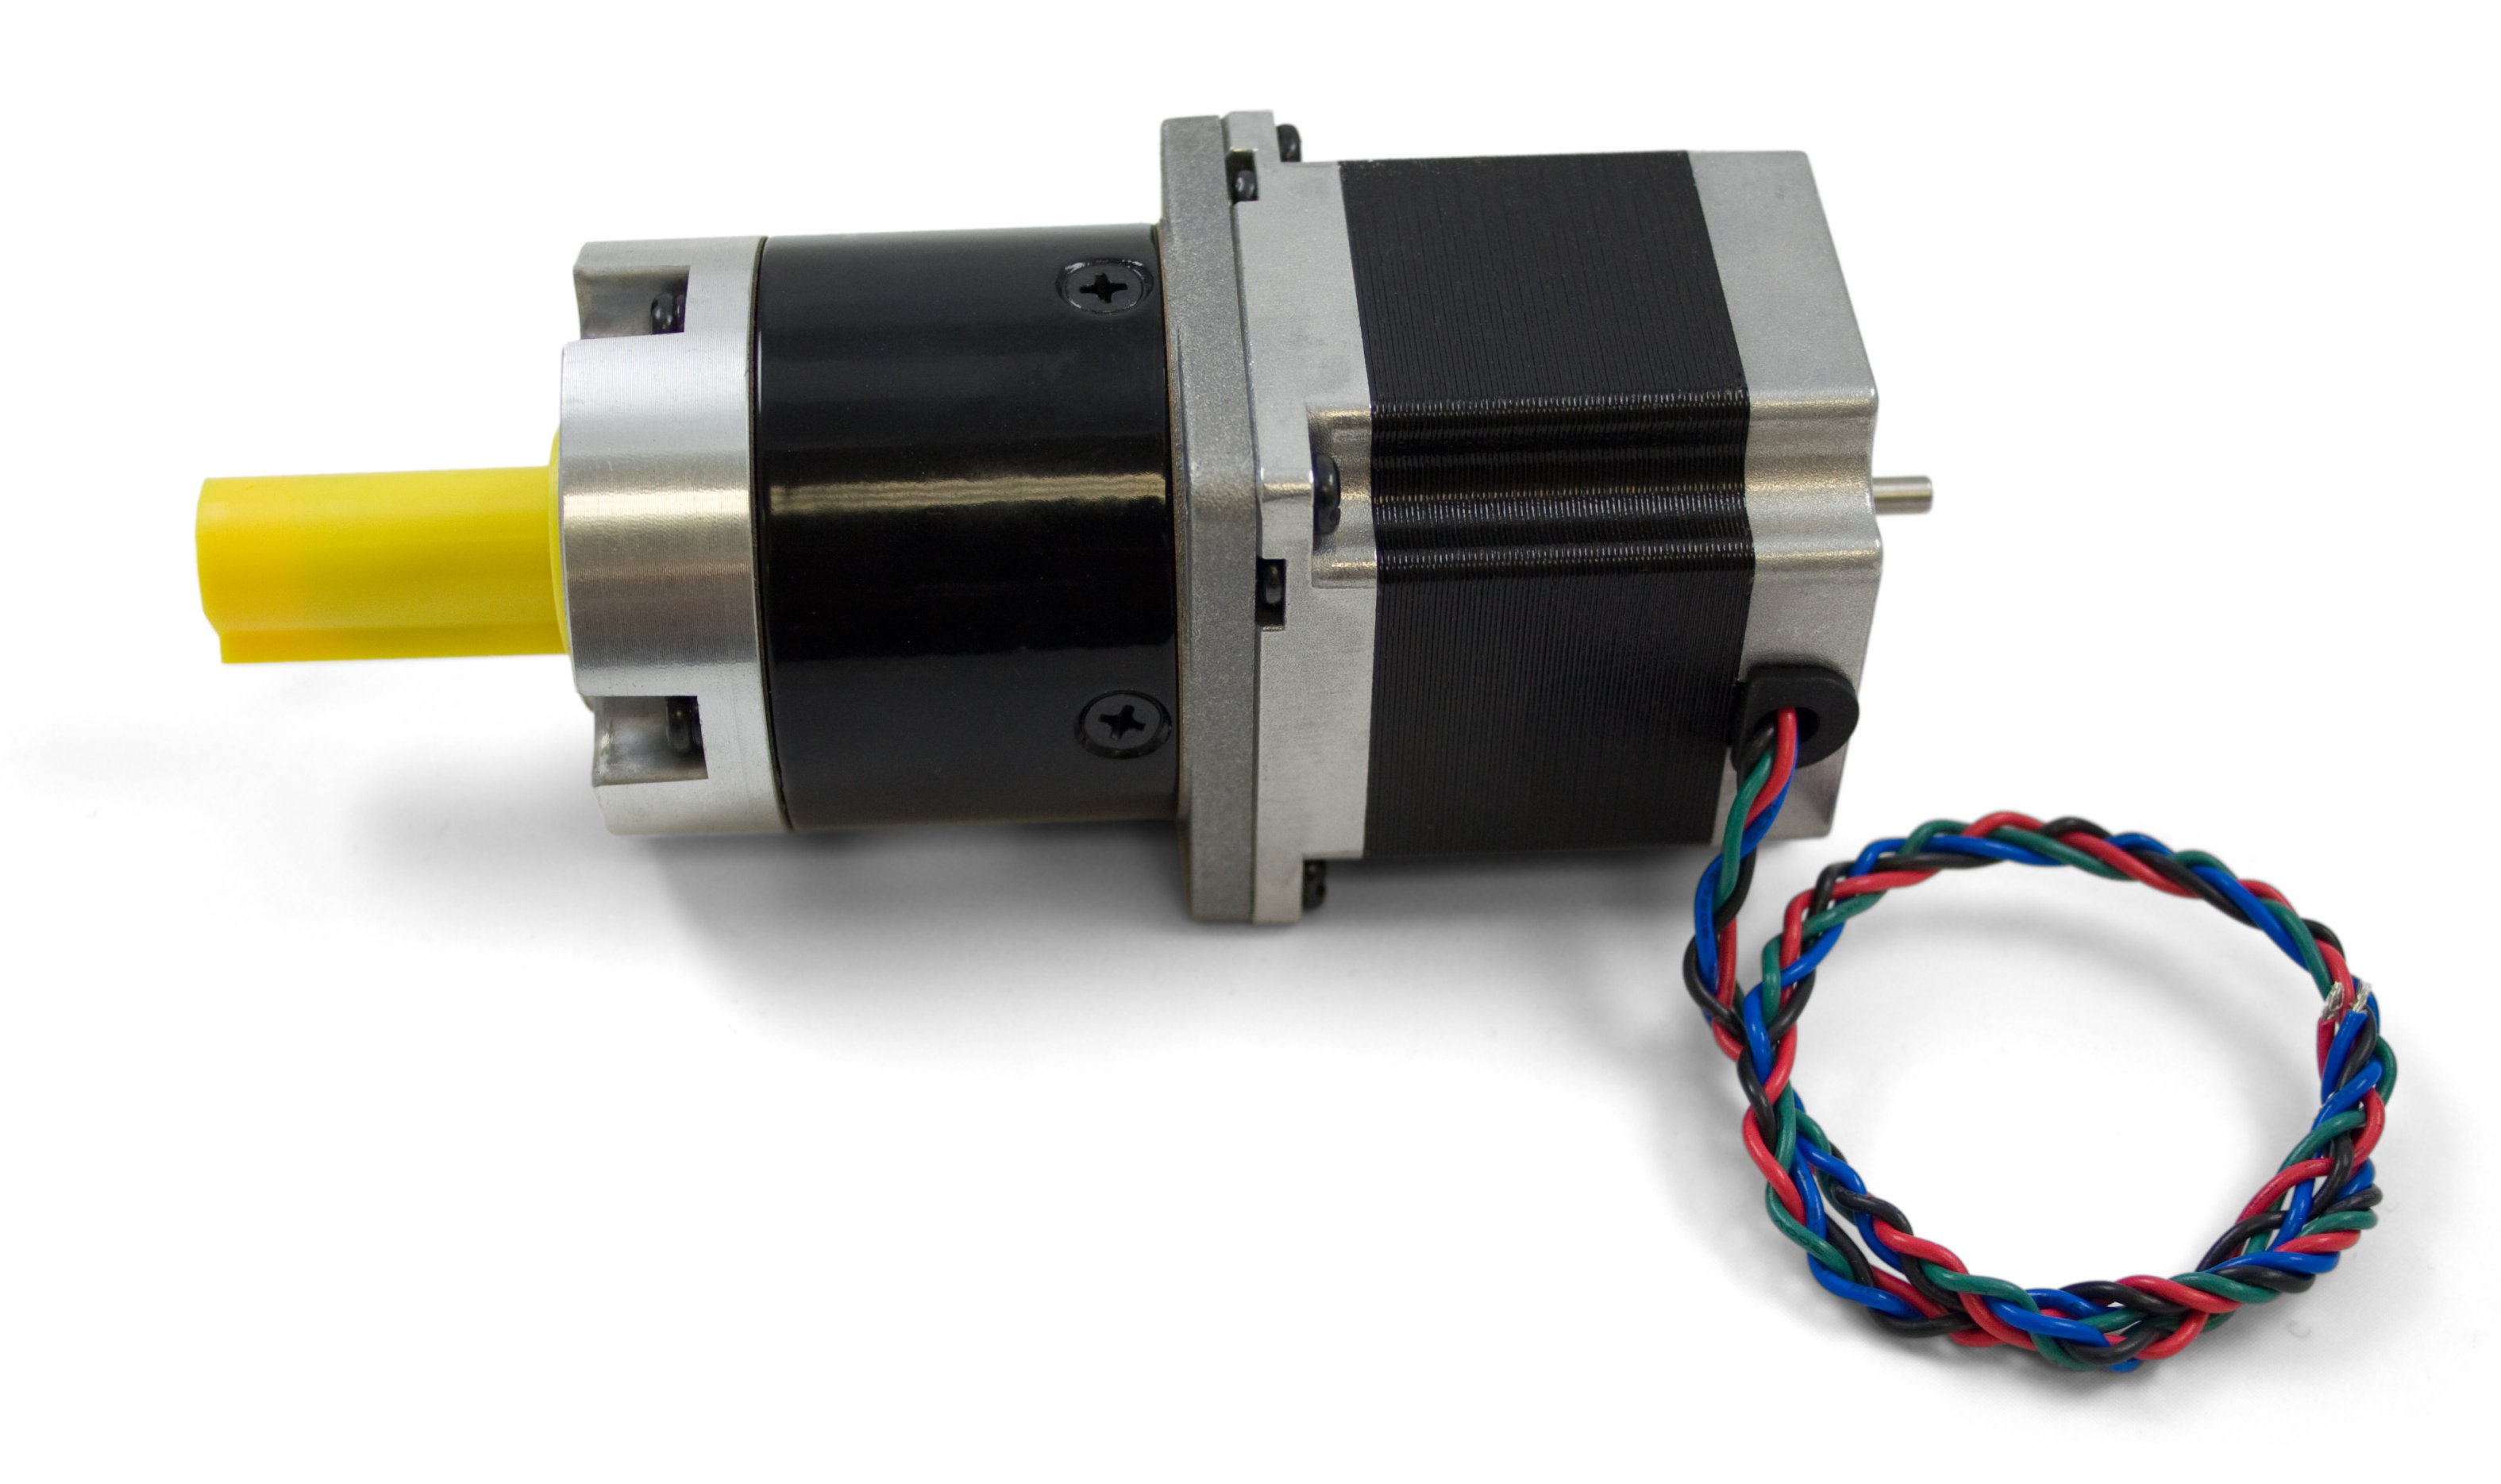 Nema 23 Stepper Motor, 2.8A, 1.8 degree, 2 phase 4 wires